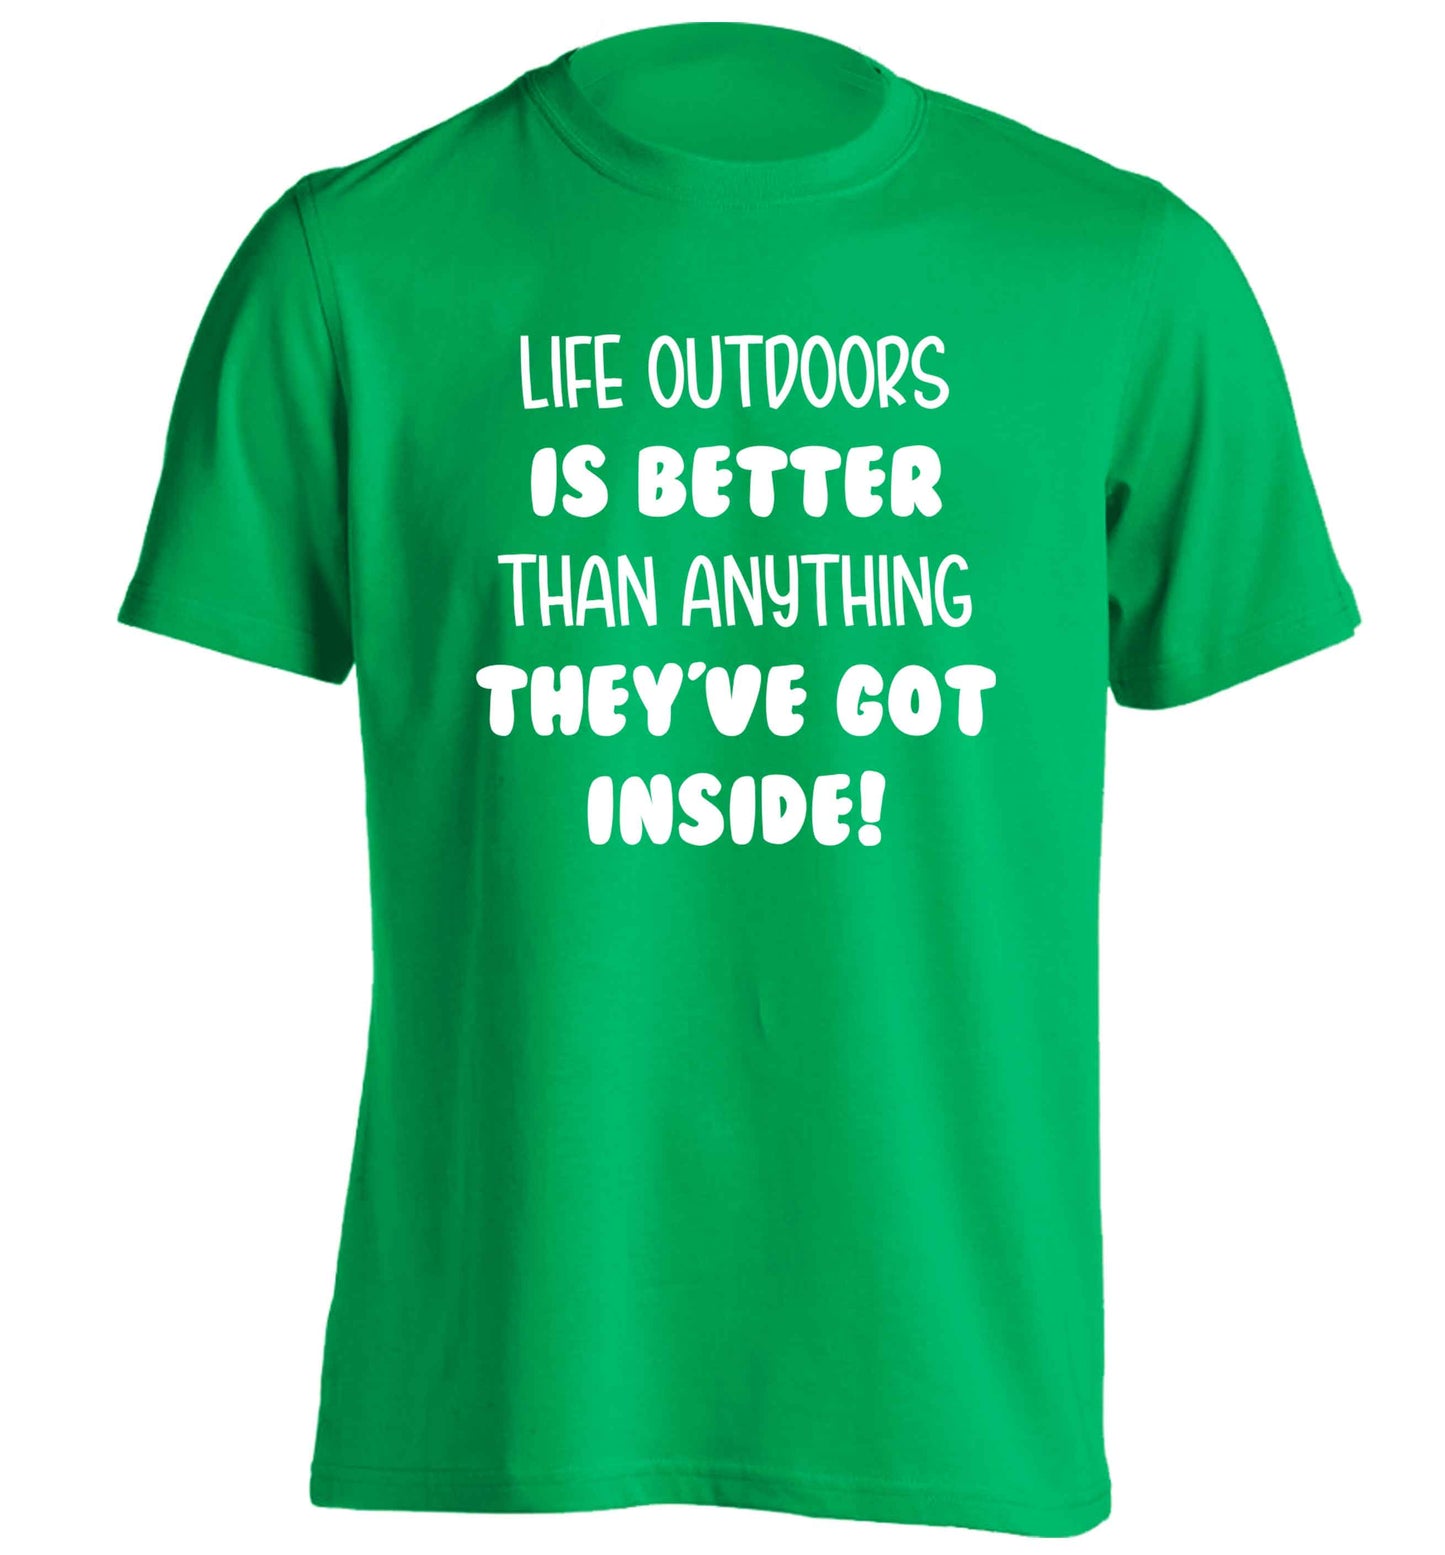 Life outdoors is better than anything they've go inside adults unisex green Tshirt 2XL